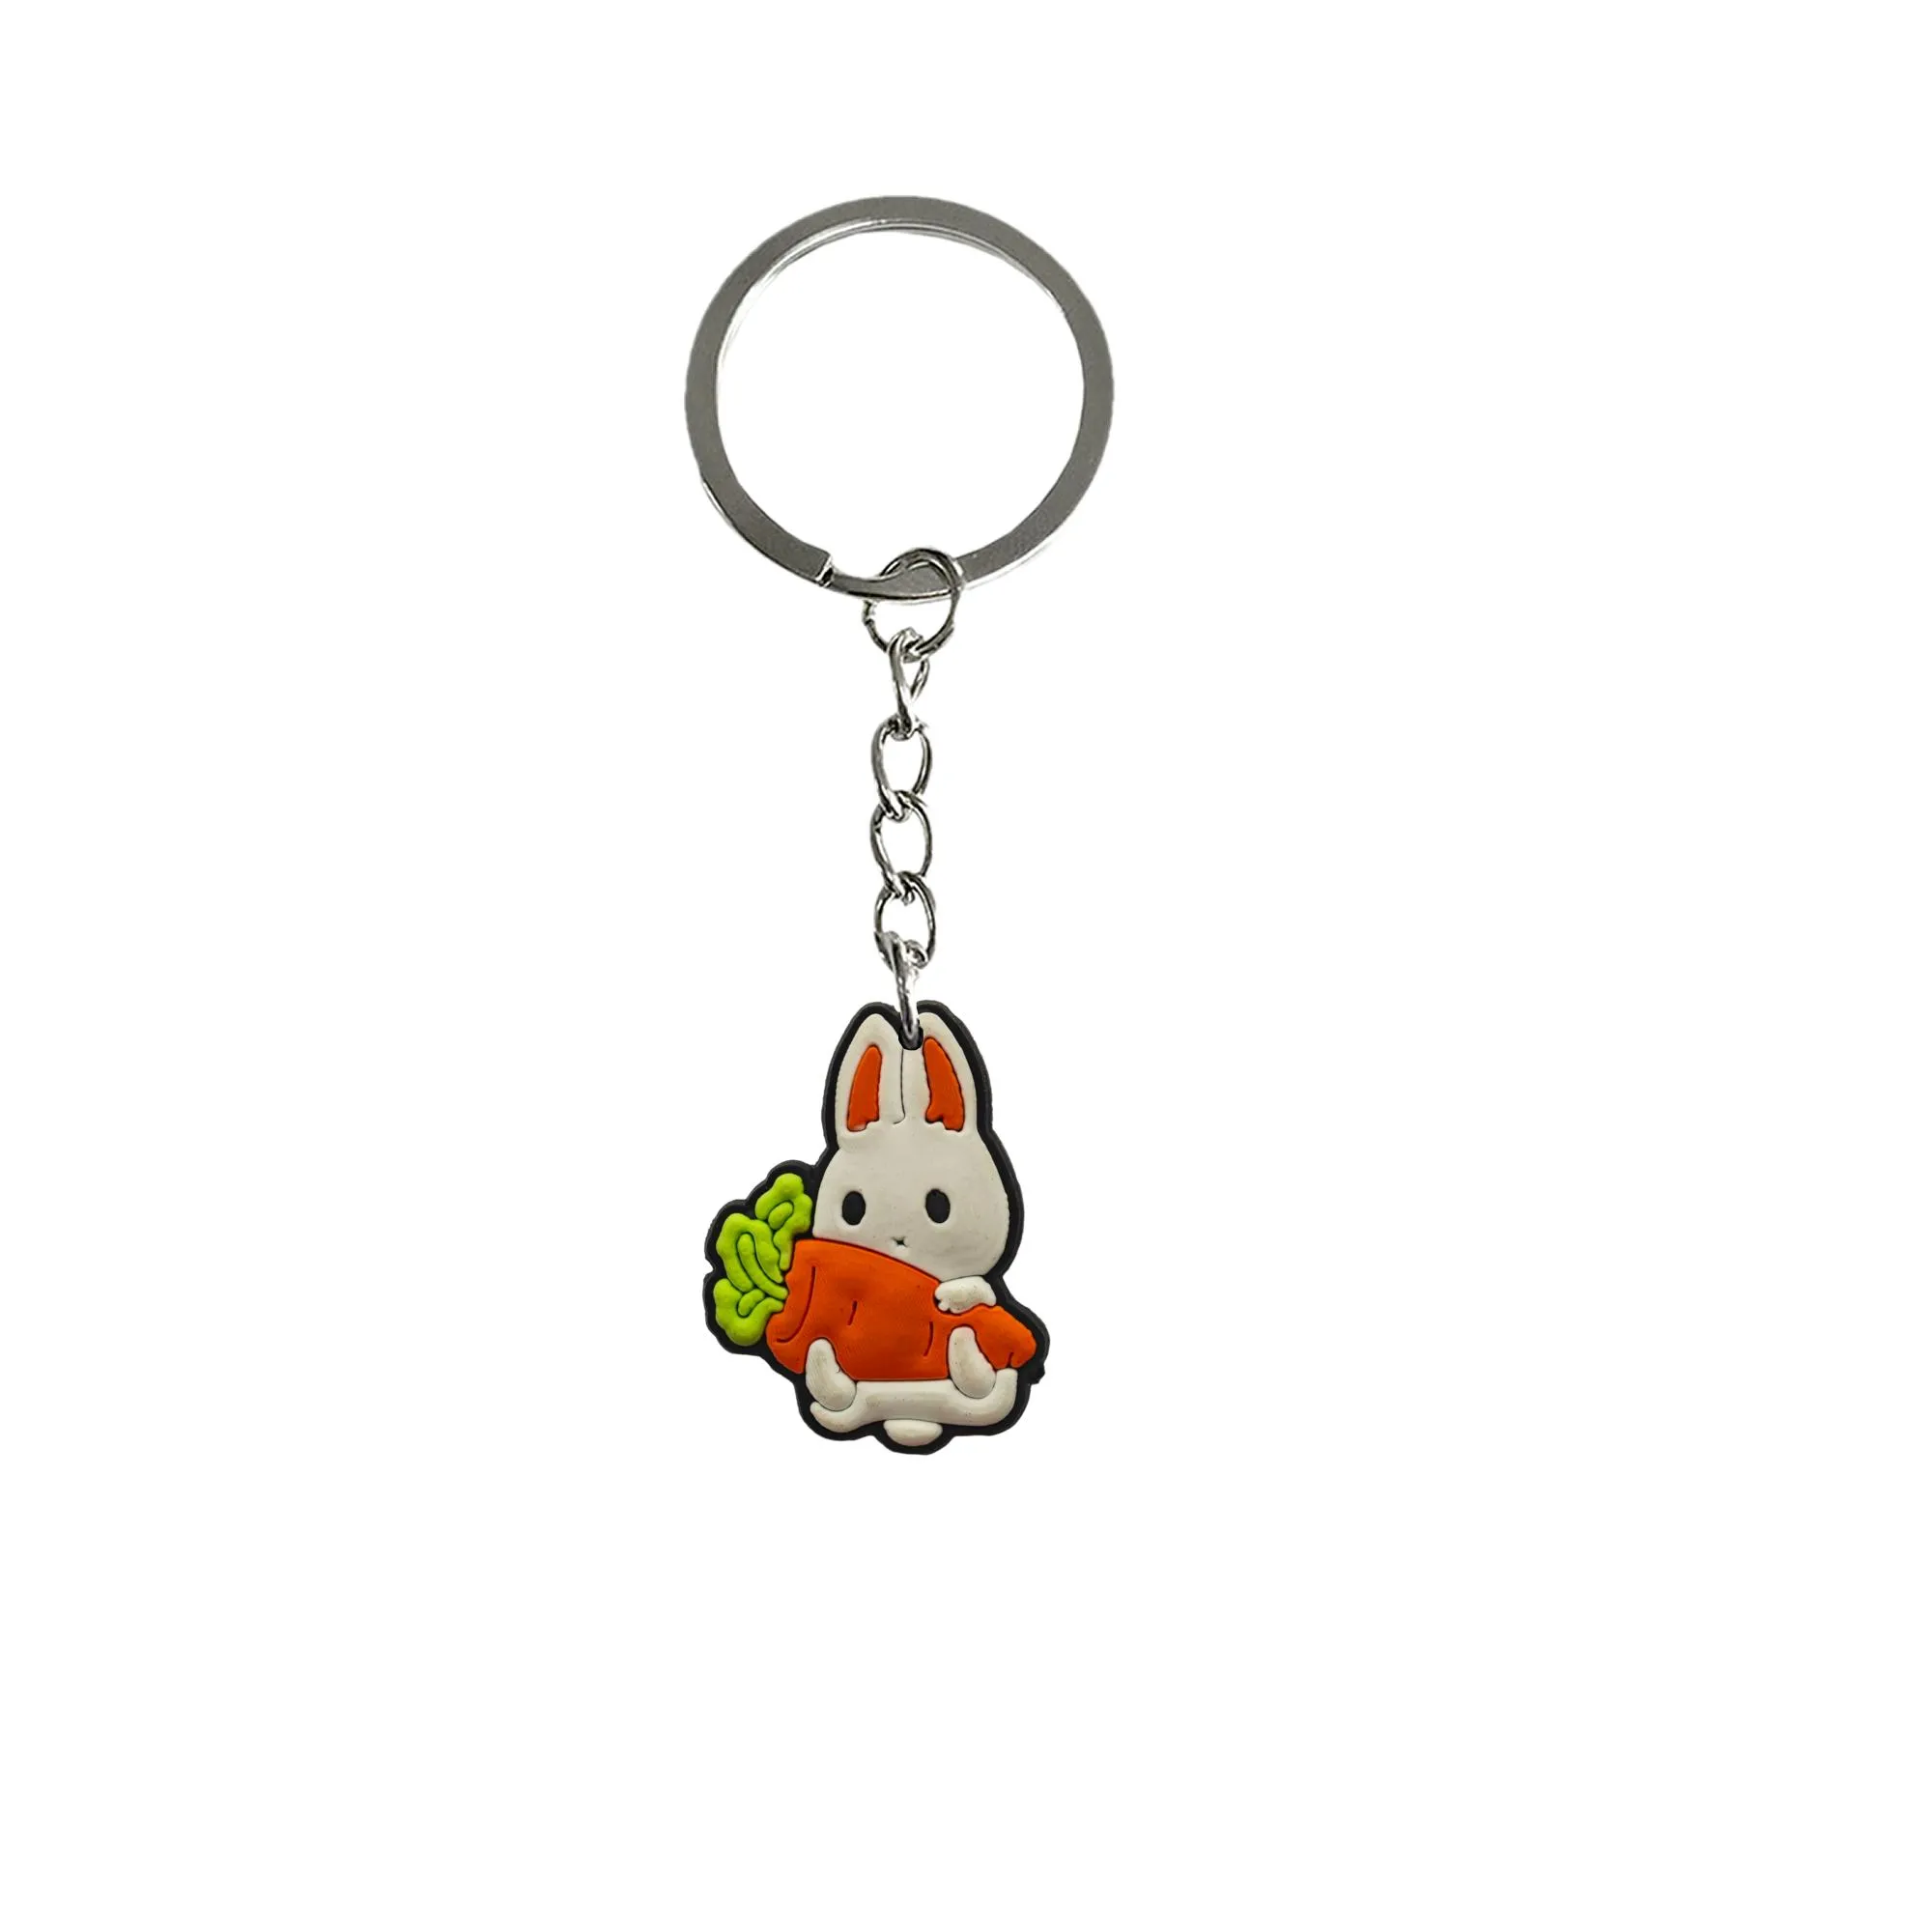 white rabbit keychain keychains for childrens party favors key rings cool colorful anime character with wristlet keyring suitable schoolbag cute silicone chain adult gift backpacks